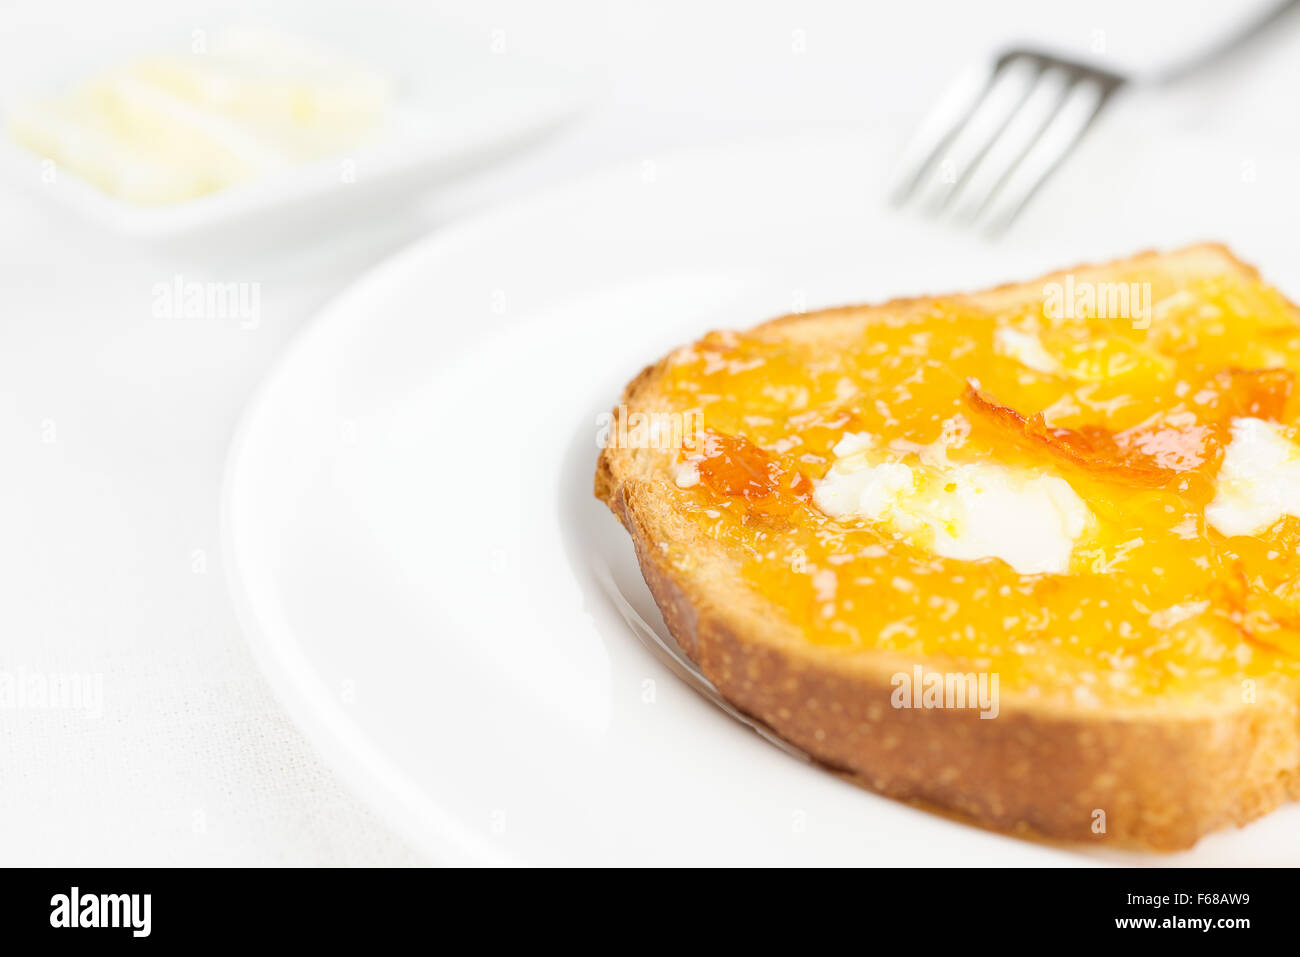 French toast with spread bitter orange marmalade or jam with candied peel, butter curls, fork on background and dishware on whit Stock Photo